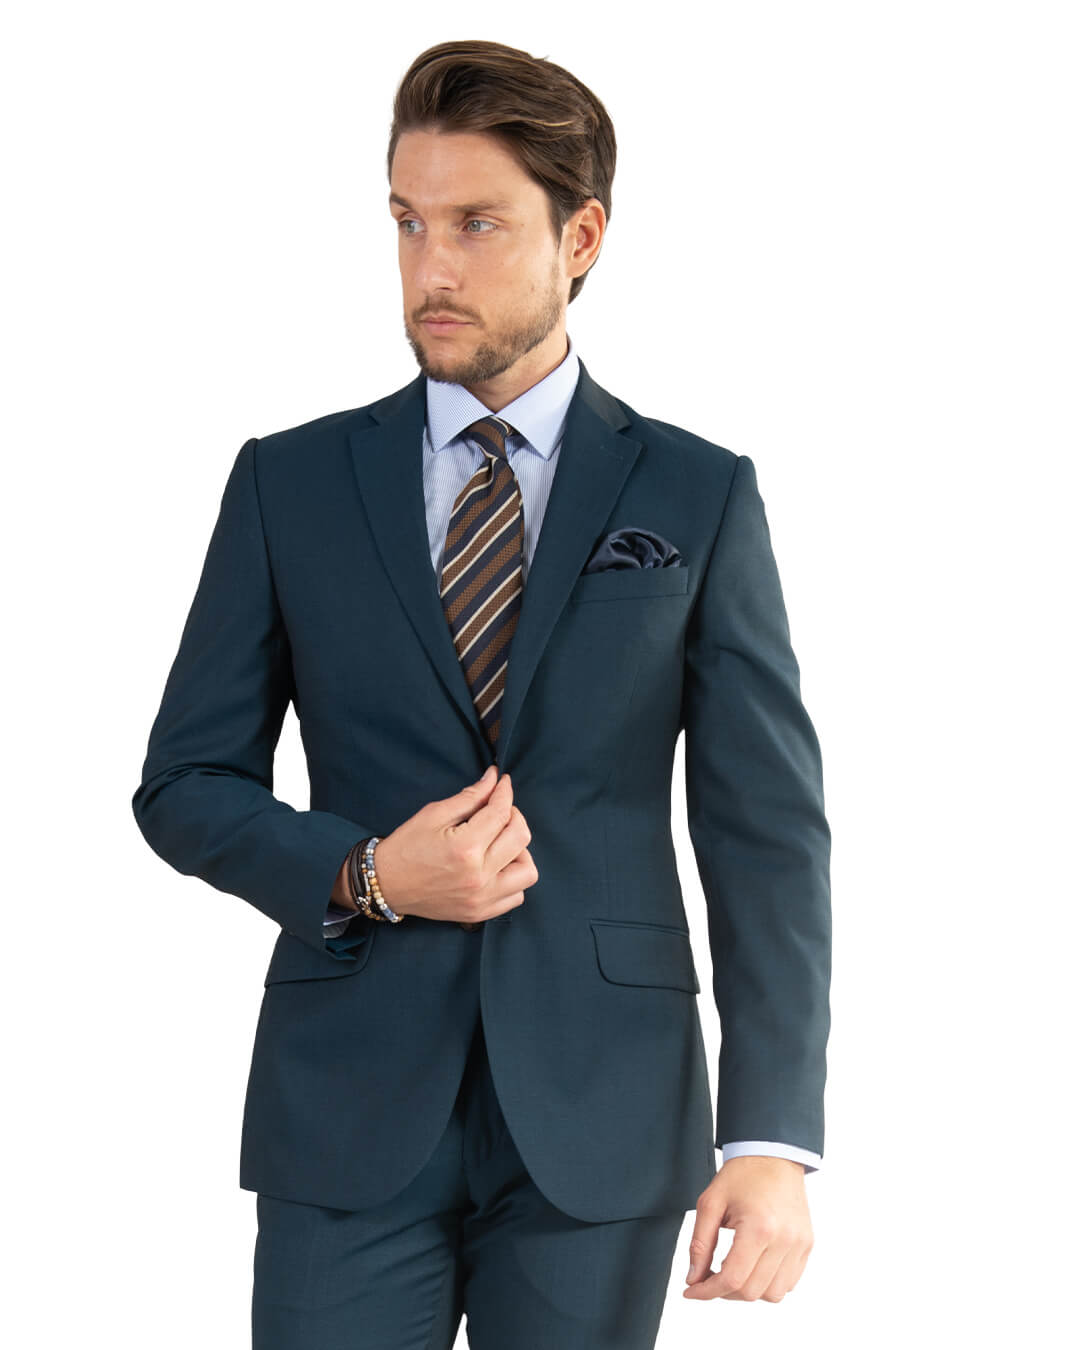 Teal Twill Suit